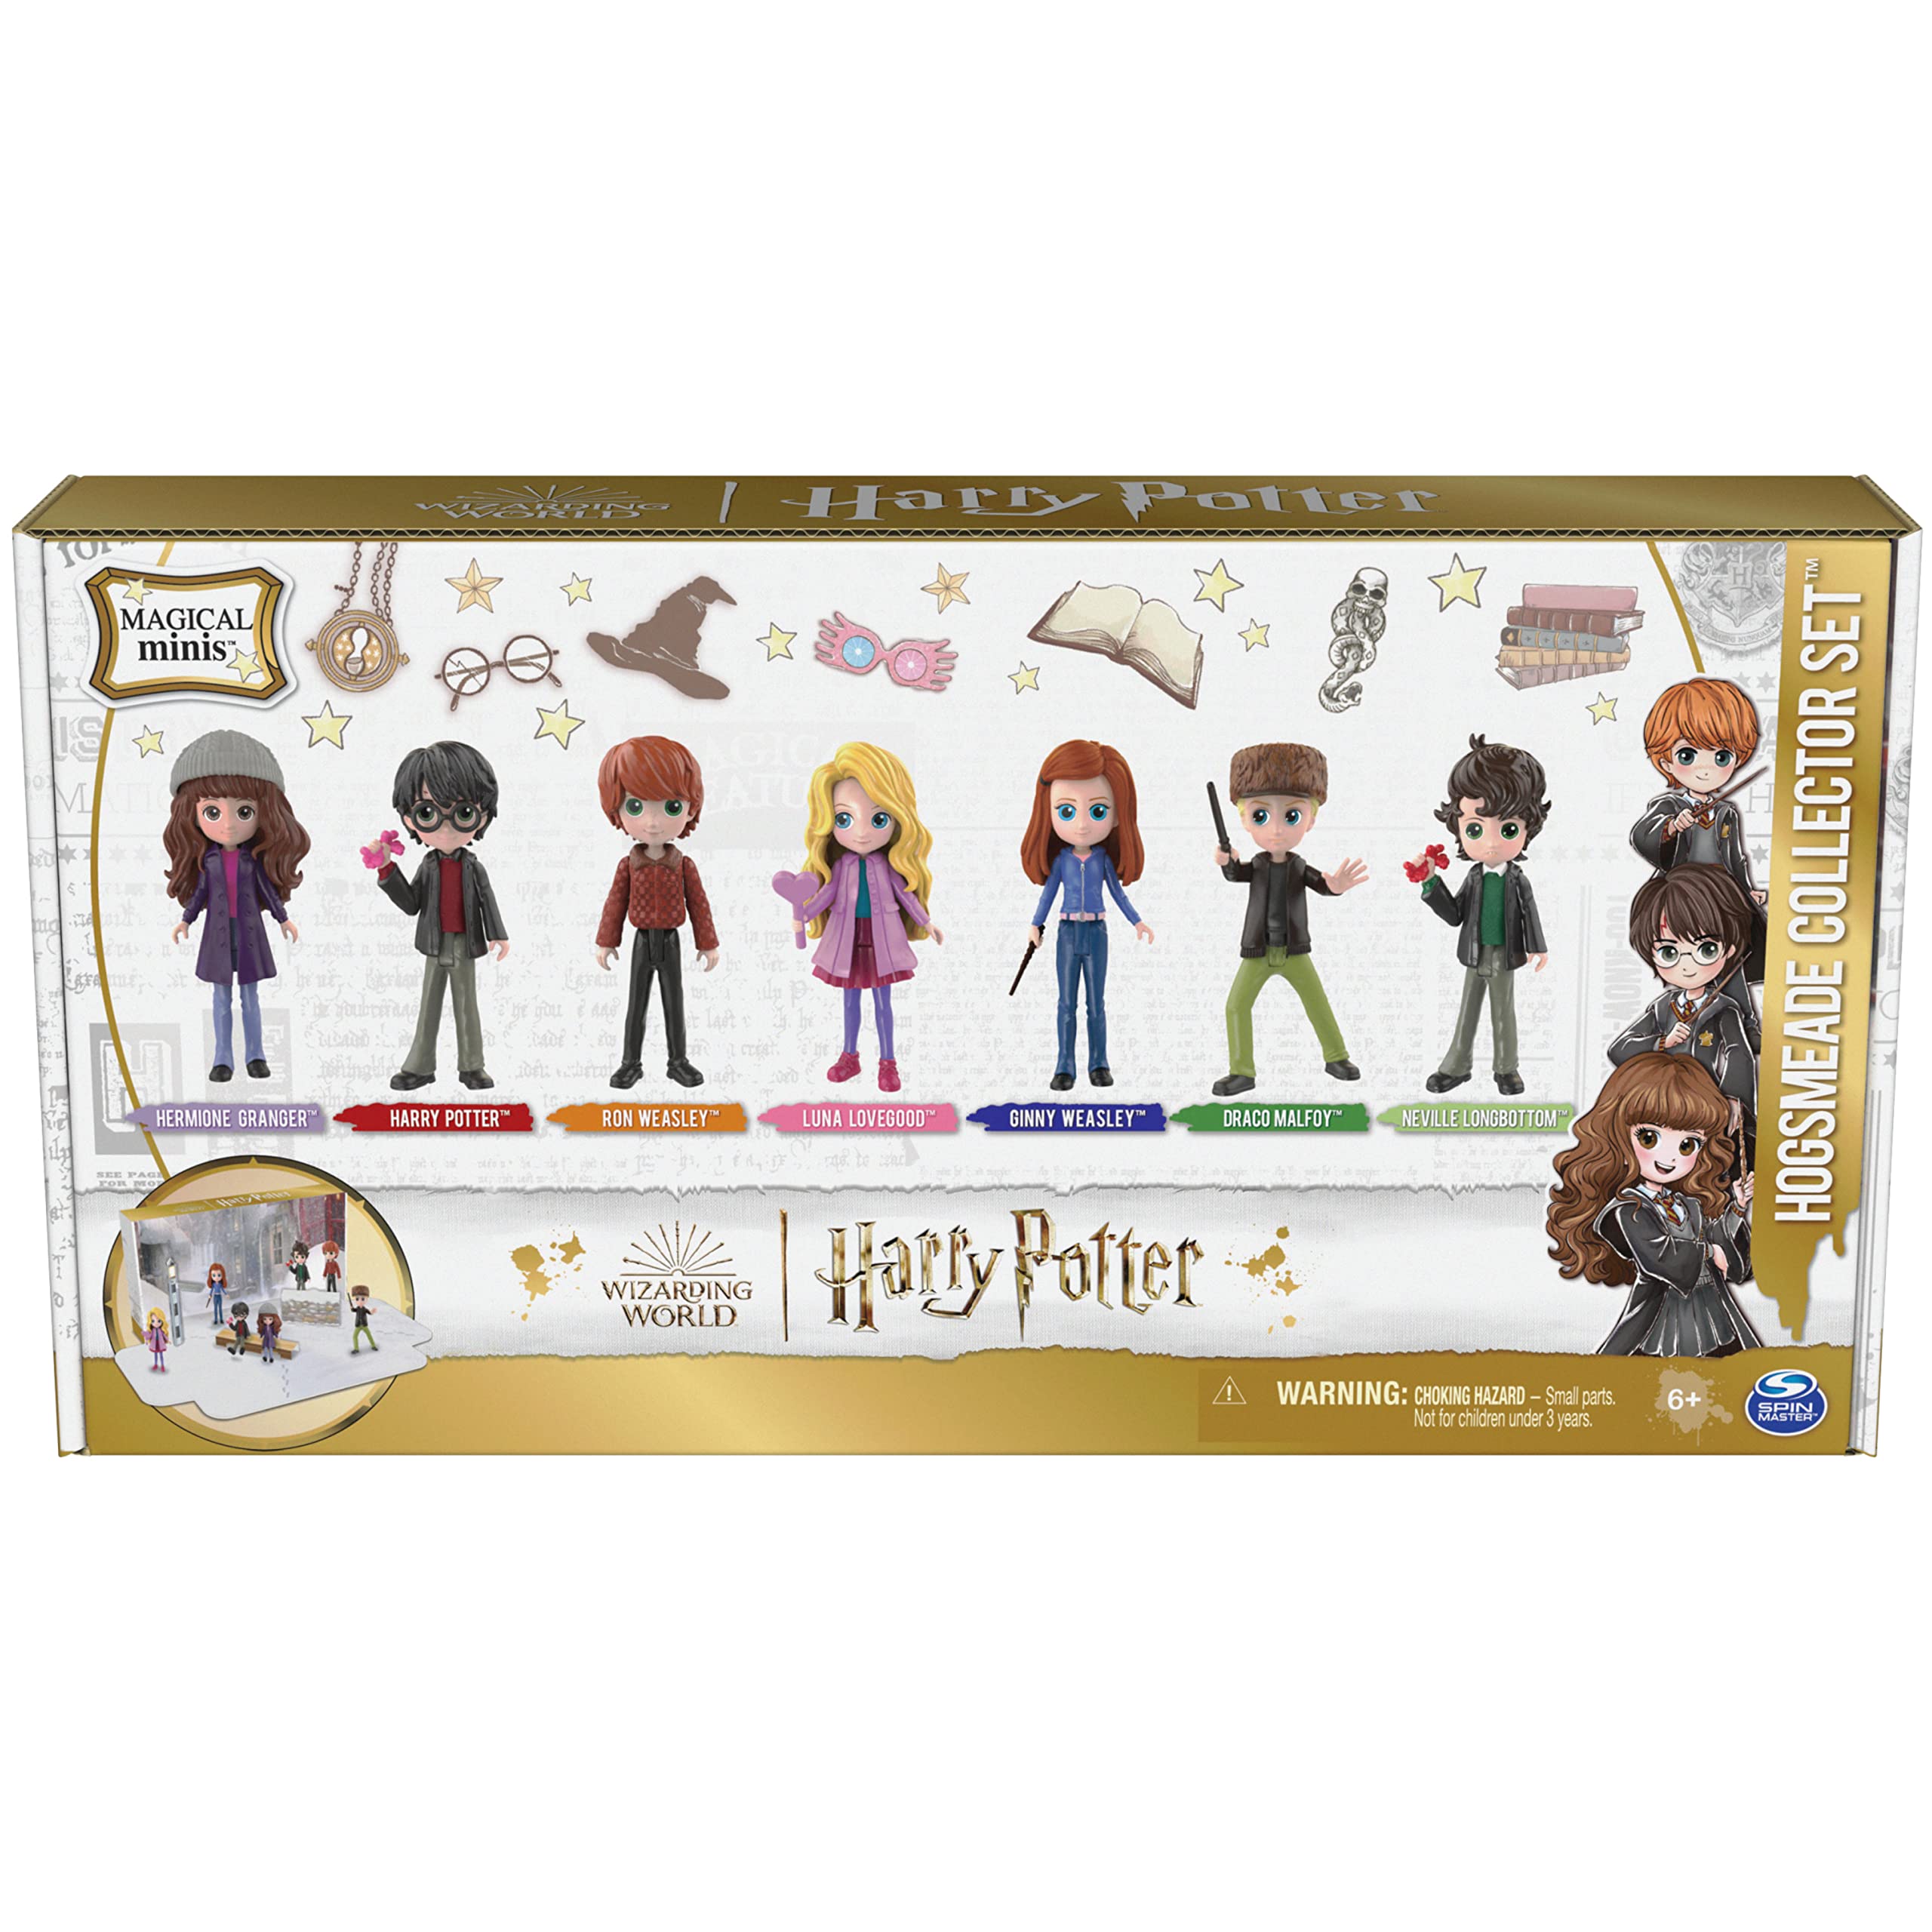 Wizarding World Harry Potter, Magical Minis Hogsmeade Collector Set with 7 Figures, Kids Toys for Girls and Boys Ages 6 and up